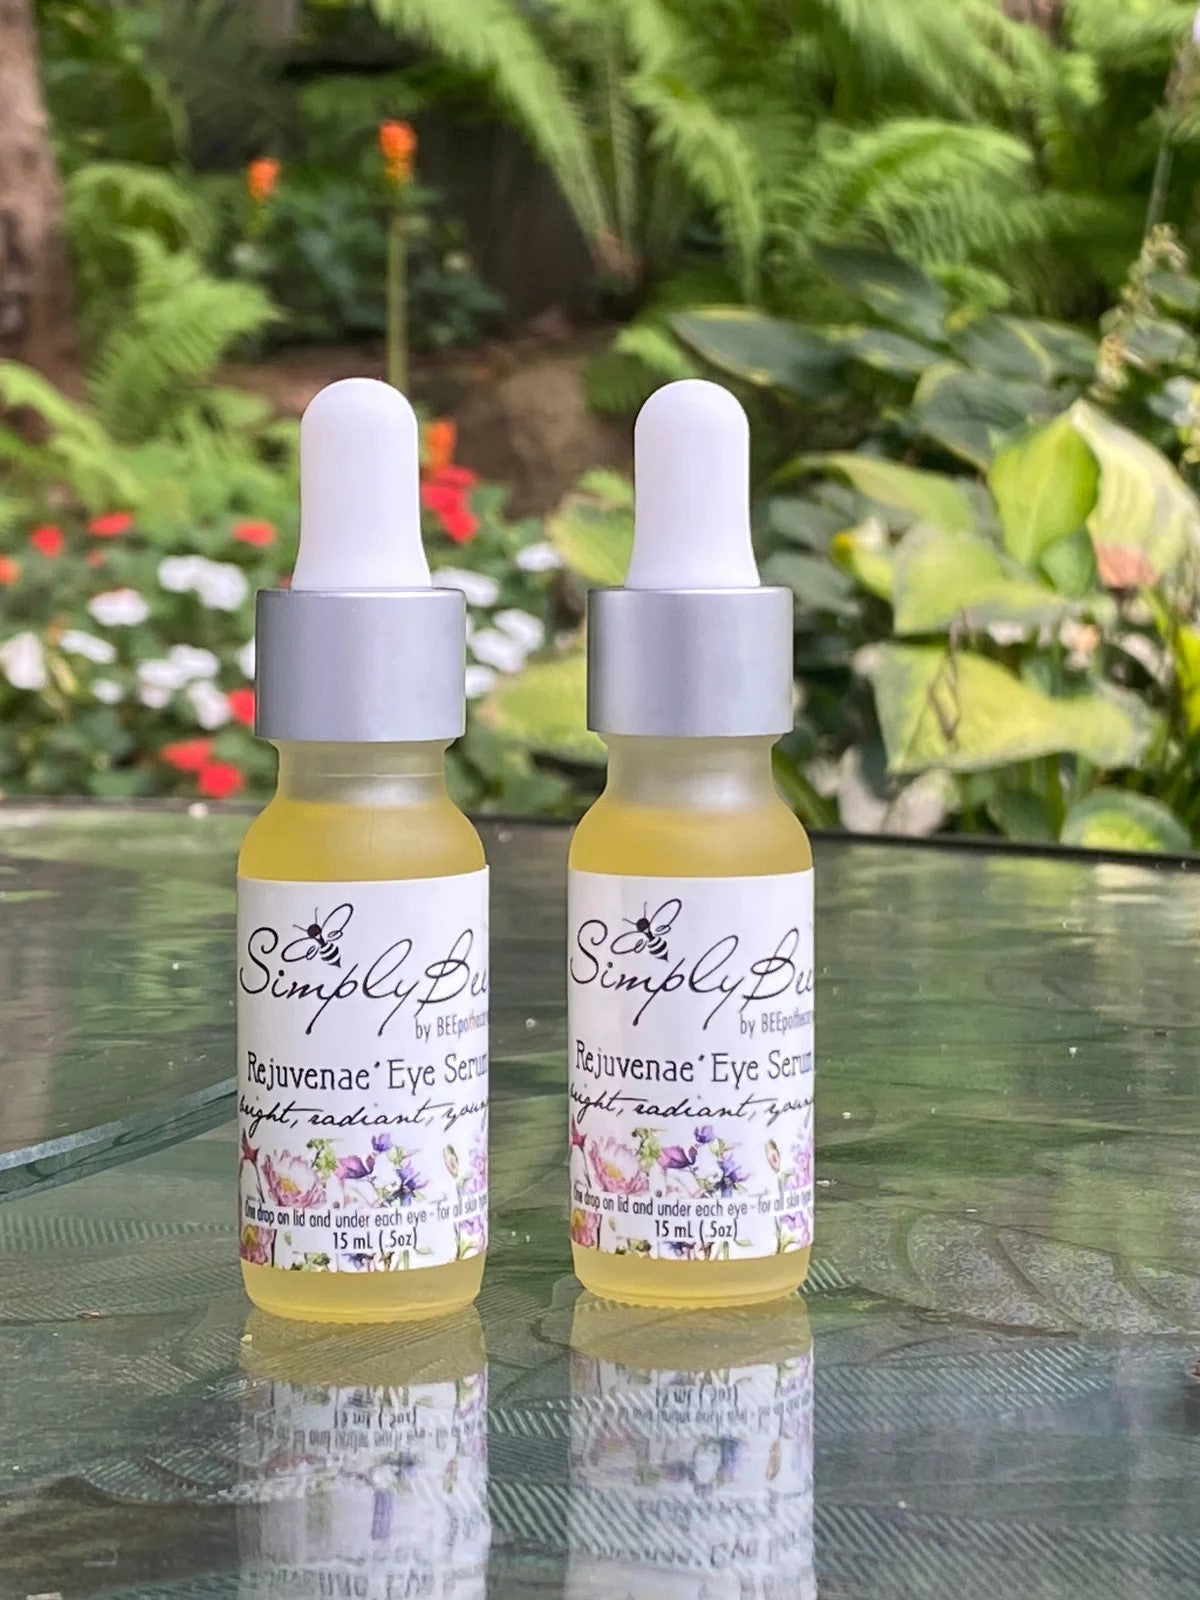 BEEpothecary bee line skin care eye serum golden color with dropper